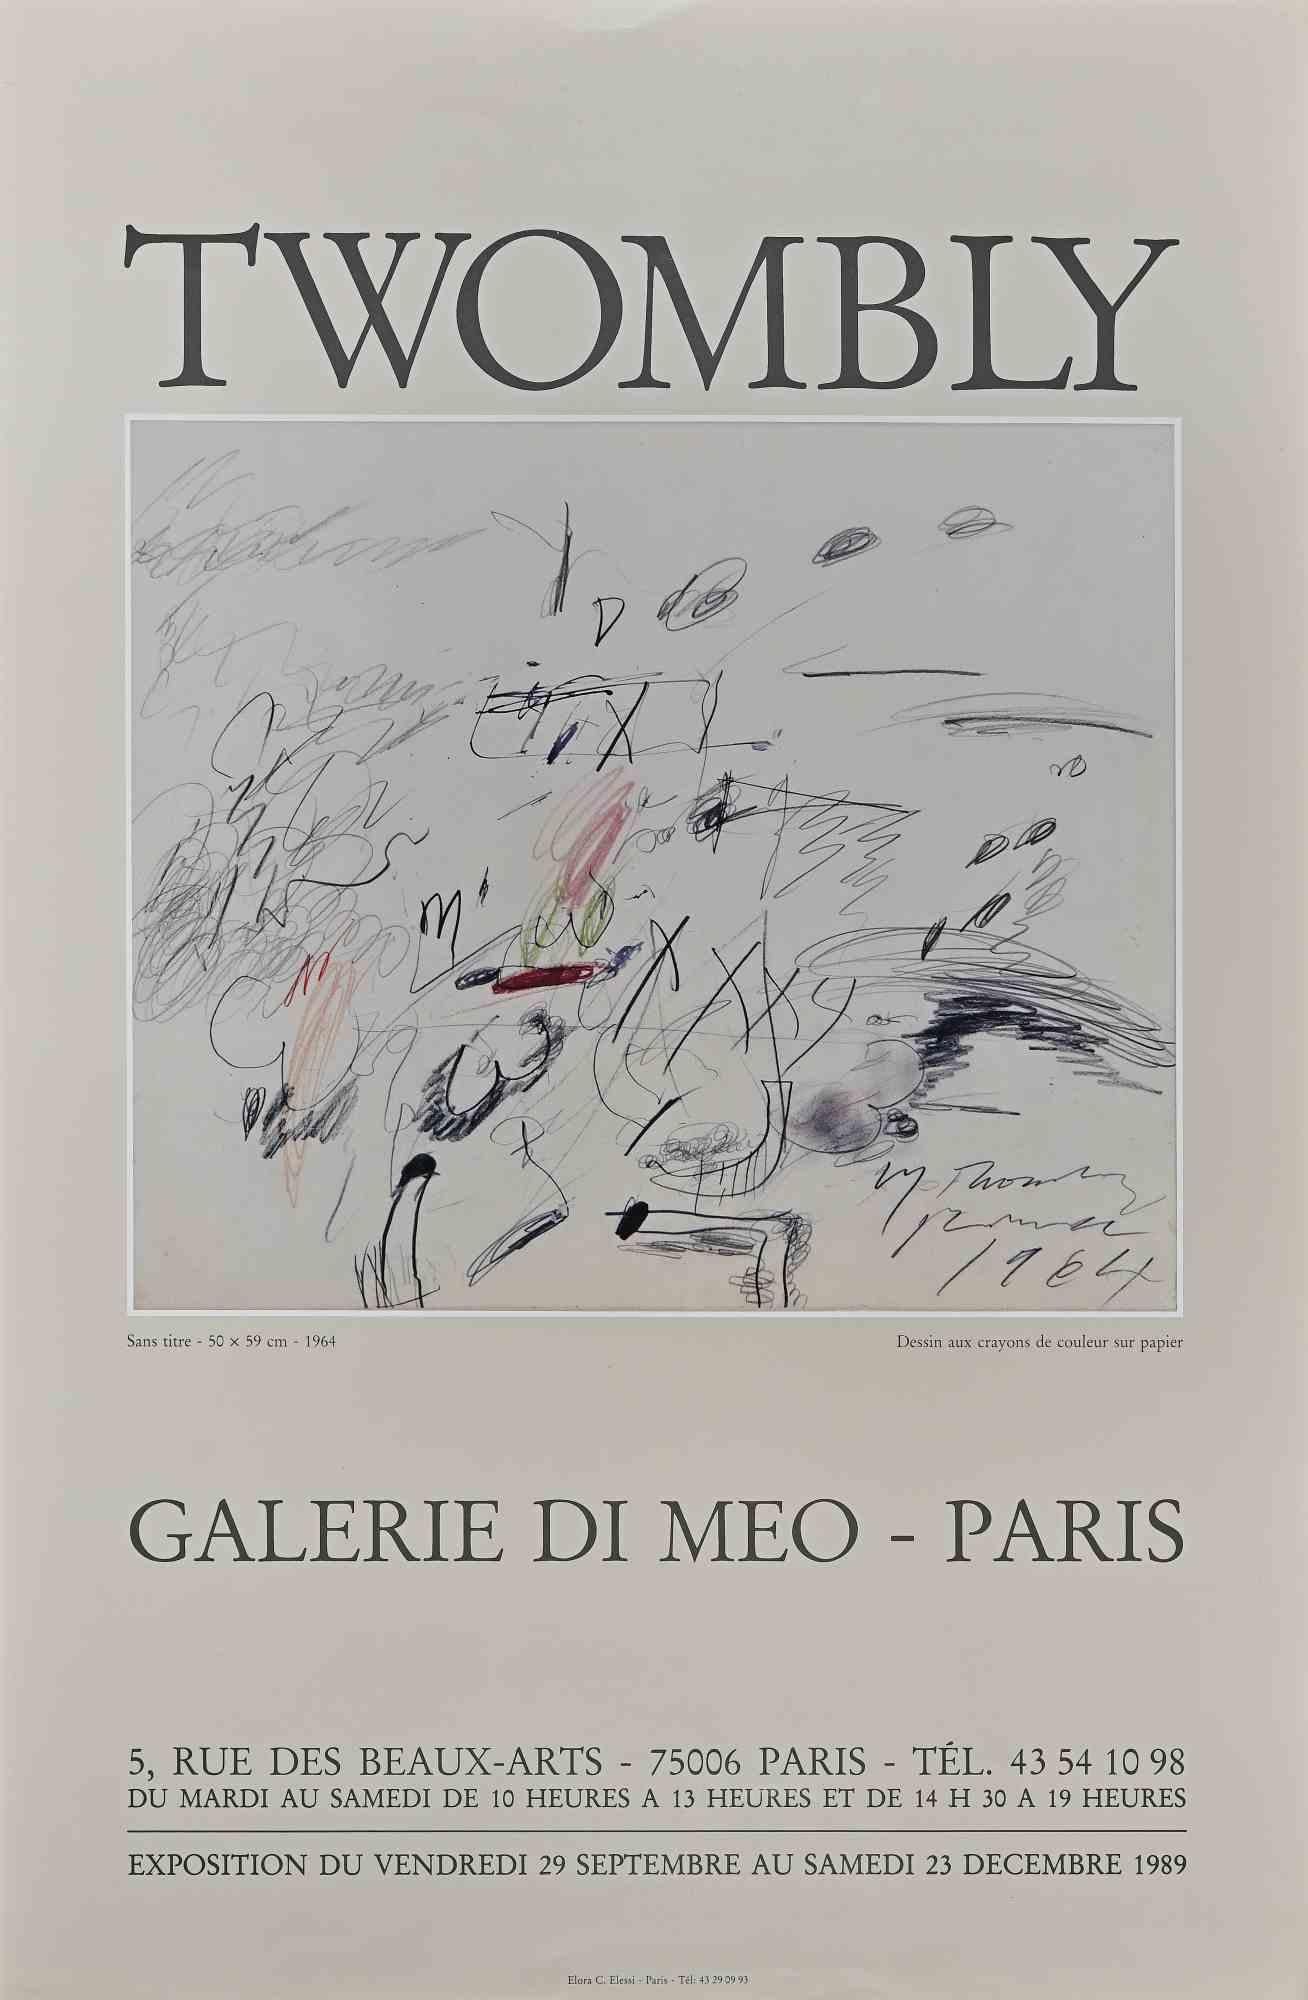 Cy Twombly Abstract Print - Twombly Exhibition - Galerie Di Meo - 1989